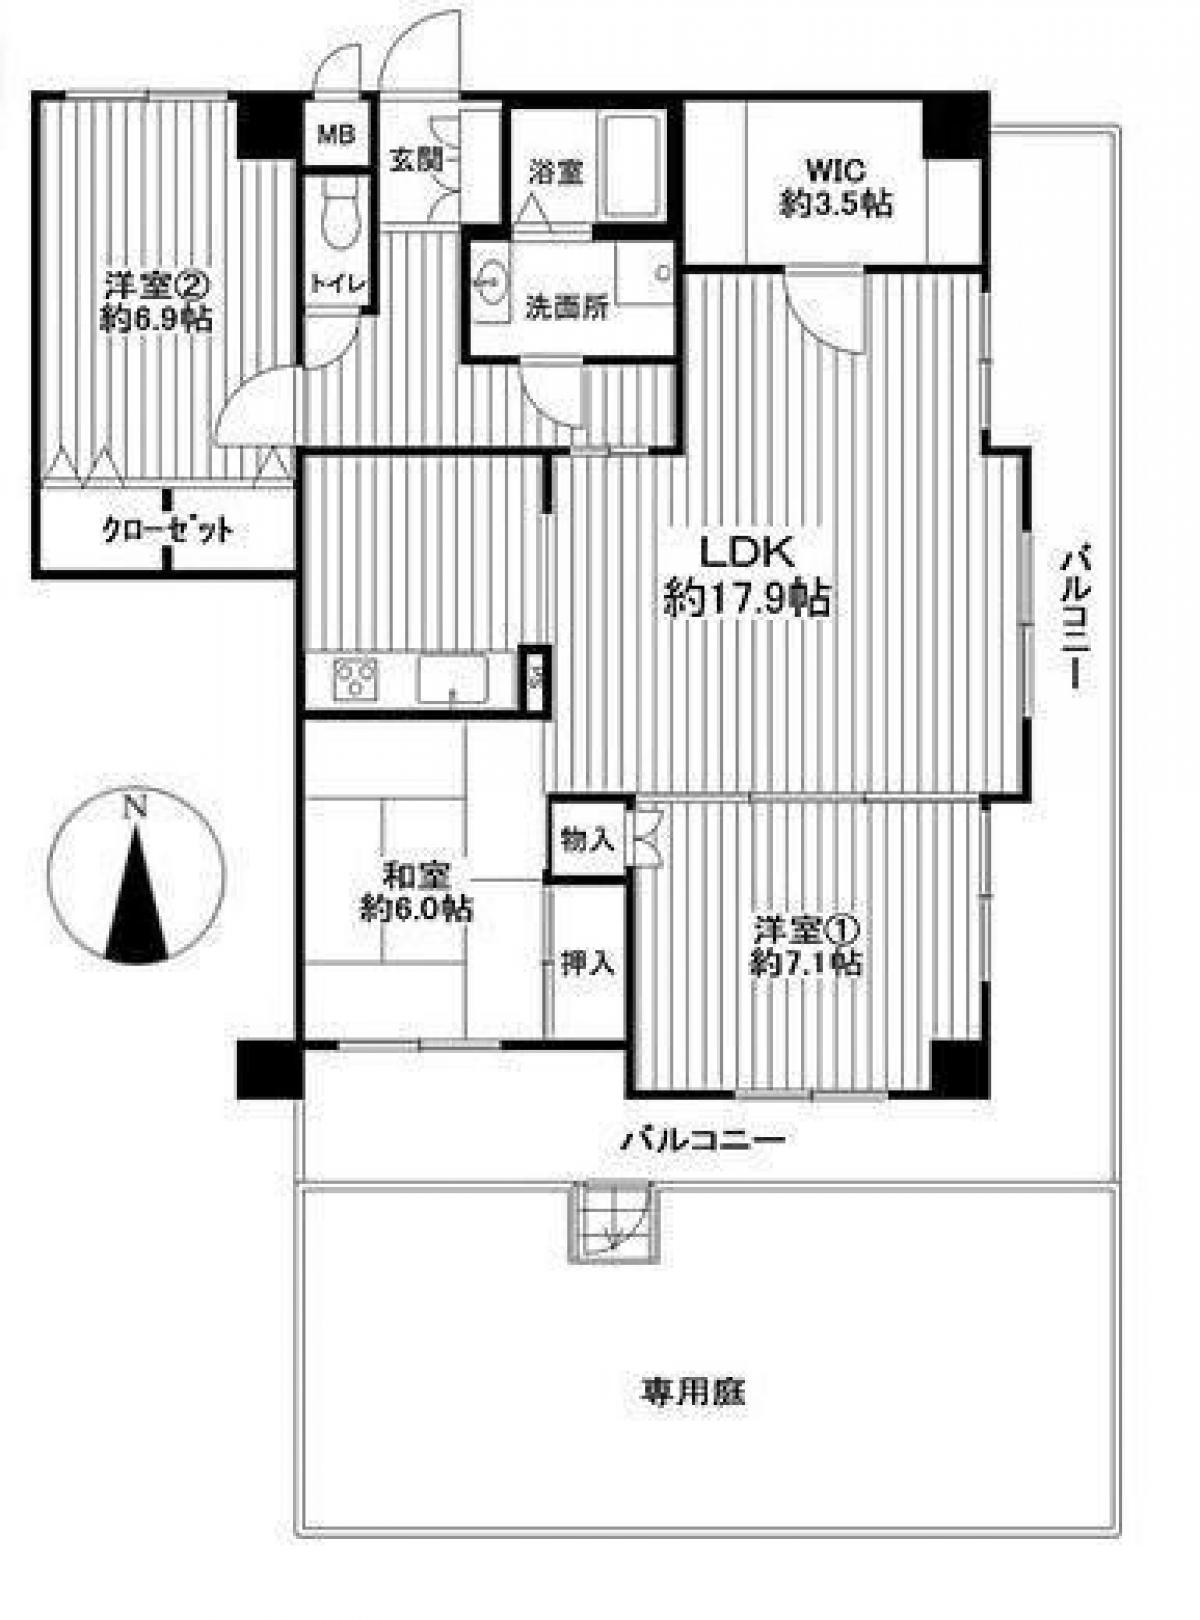 Picture of Apartment For Sale in Toyohashi Shi, Aichi, Japan